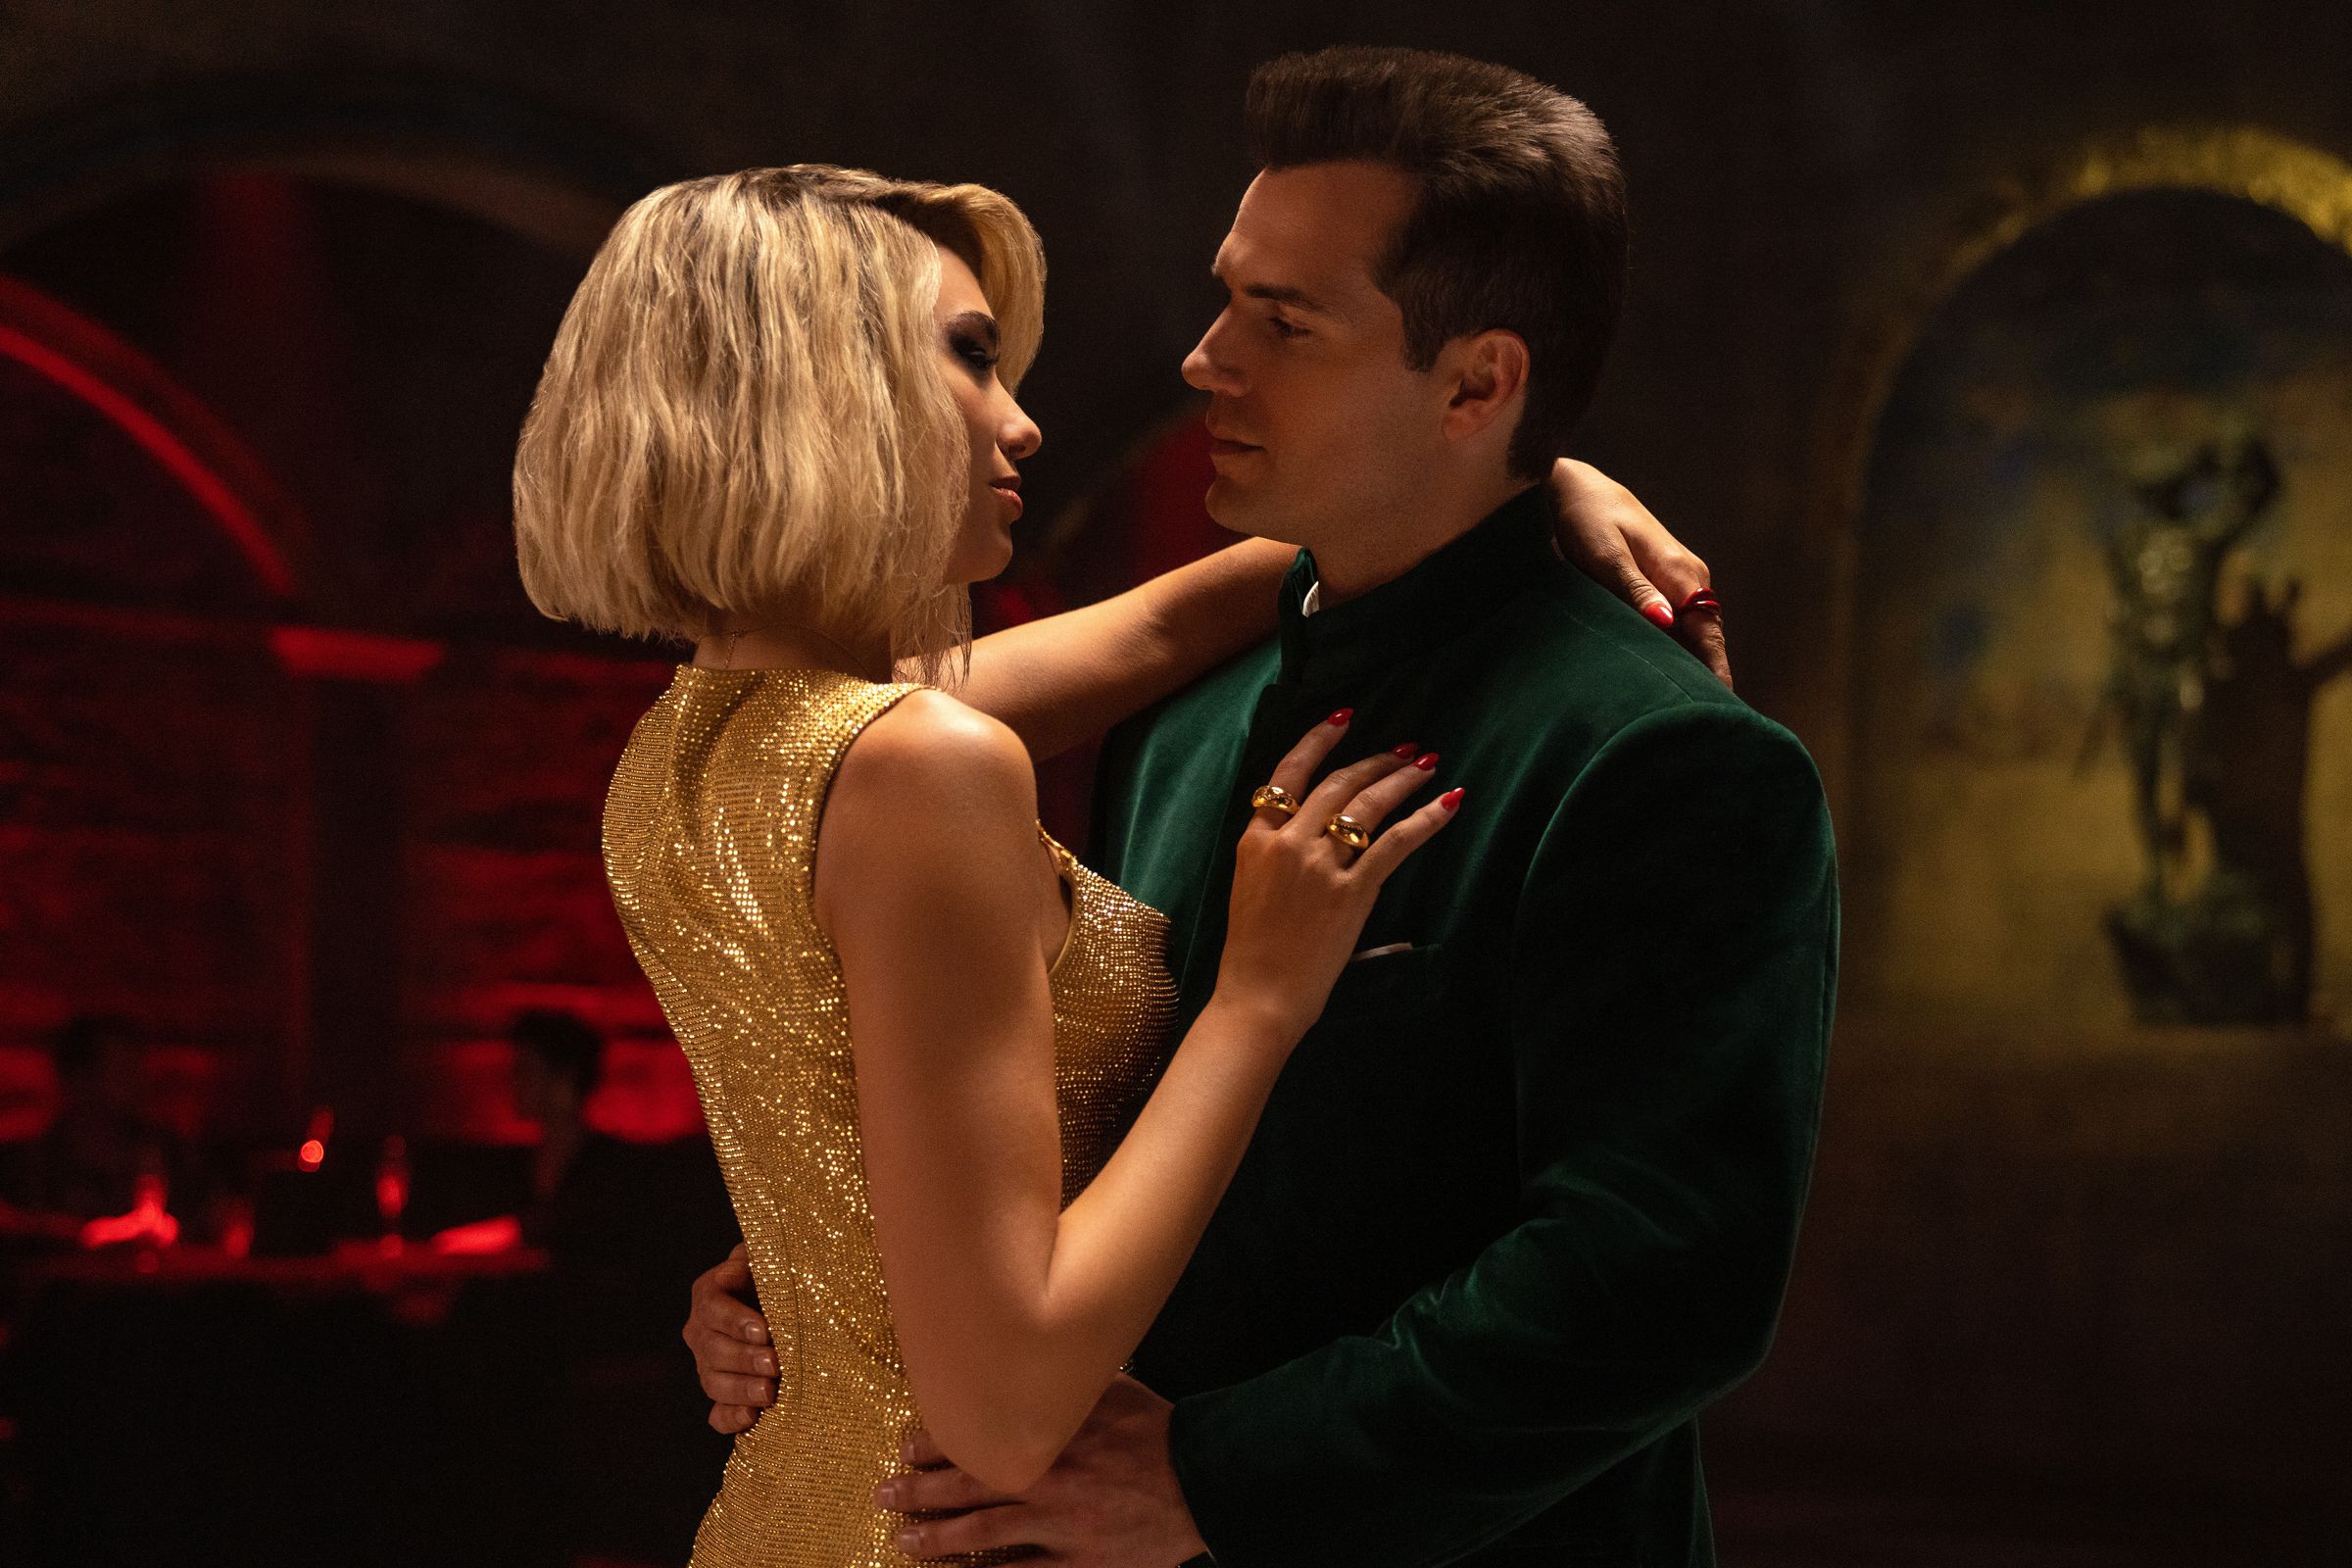 A blonde woman in a shimmering golden dress dancing closely with a brown-haired man wearing a green crushed velvet suit.